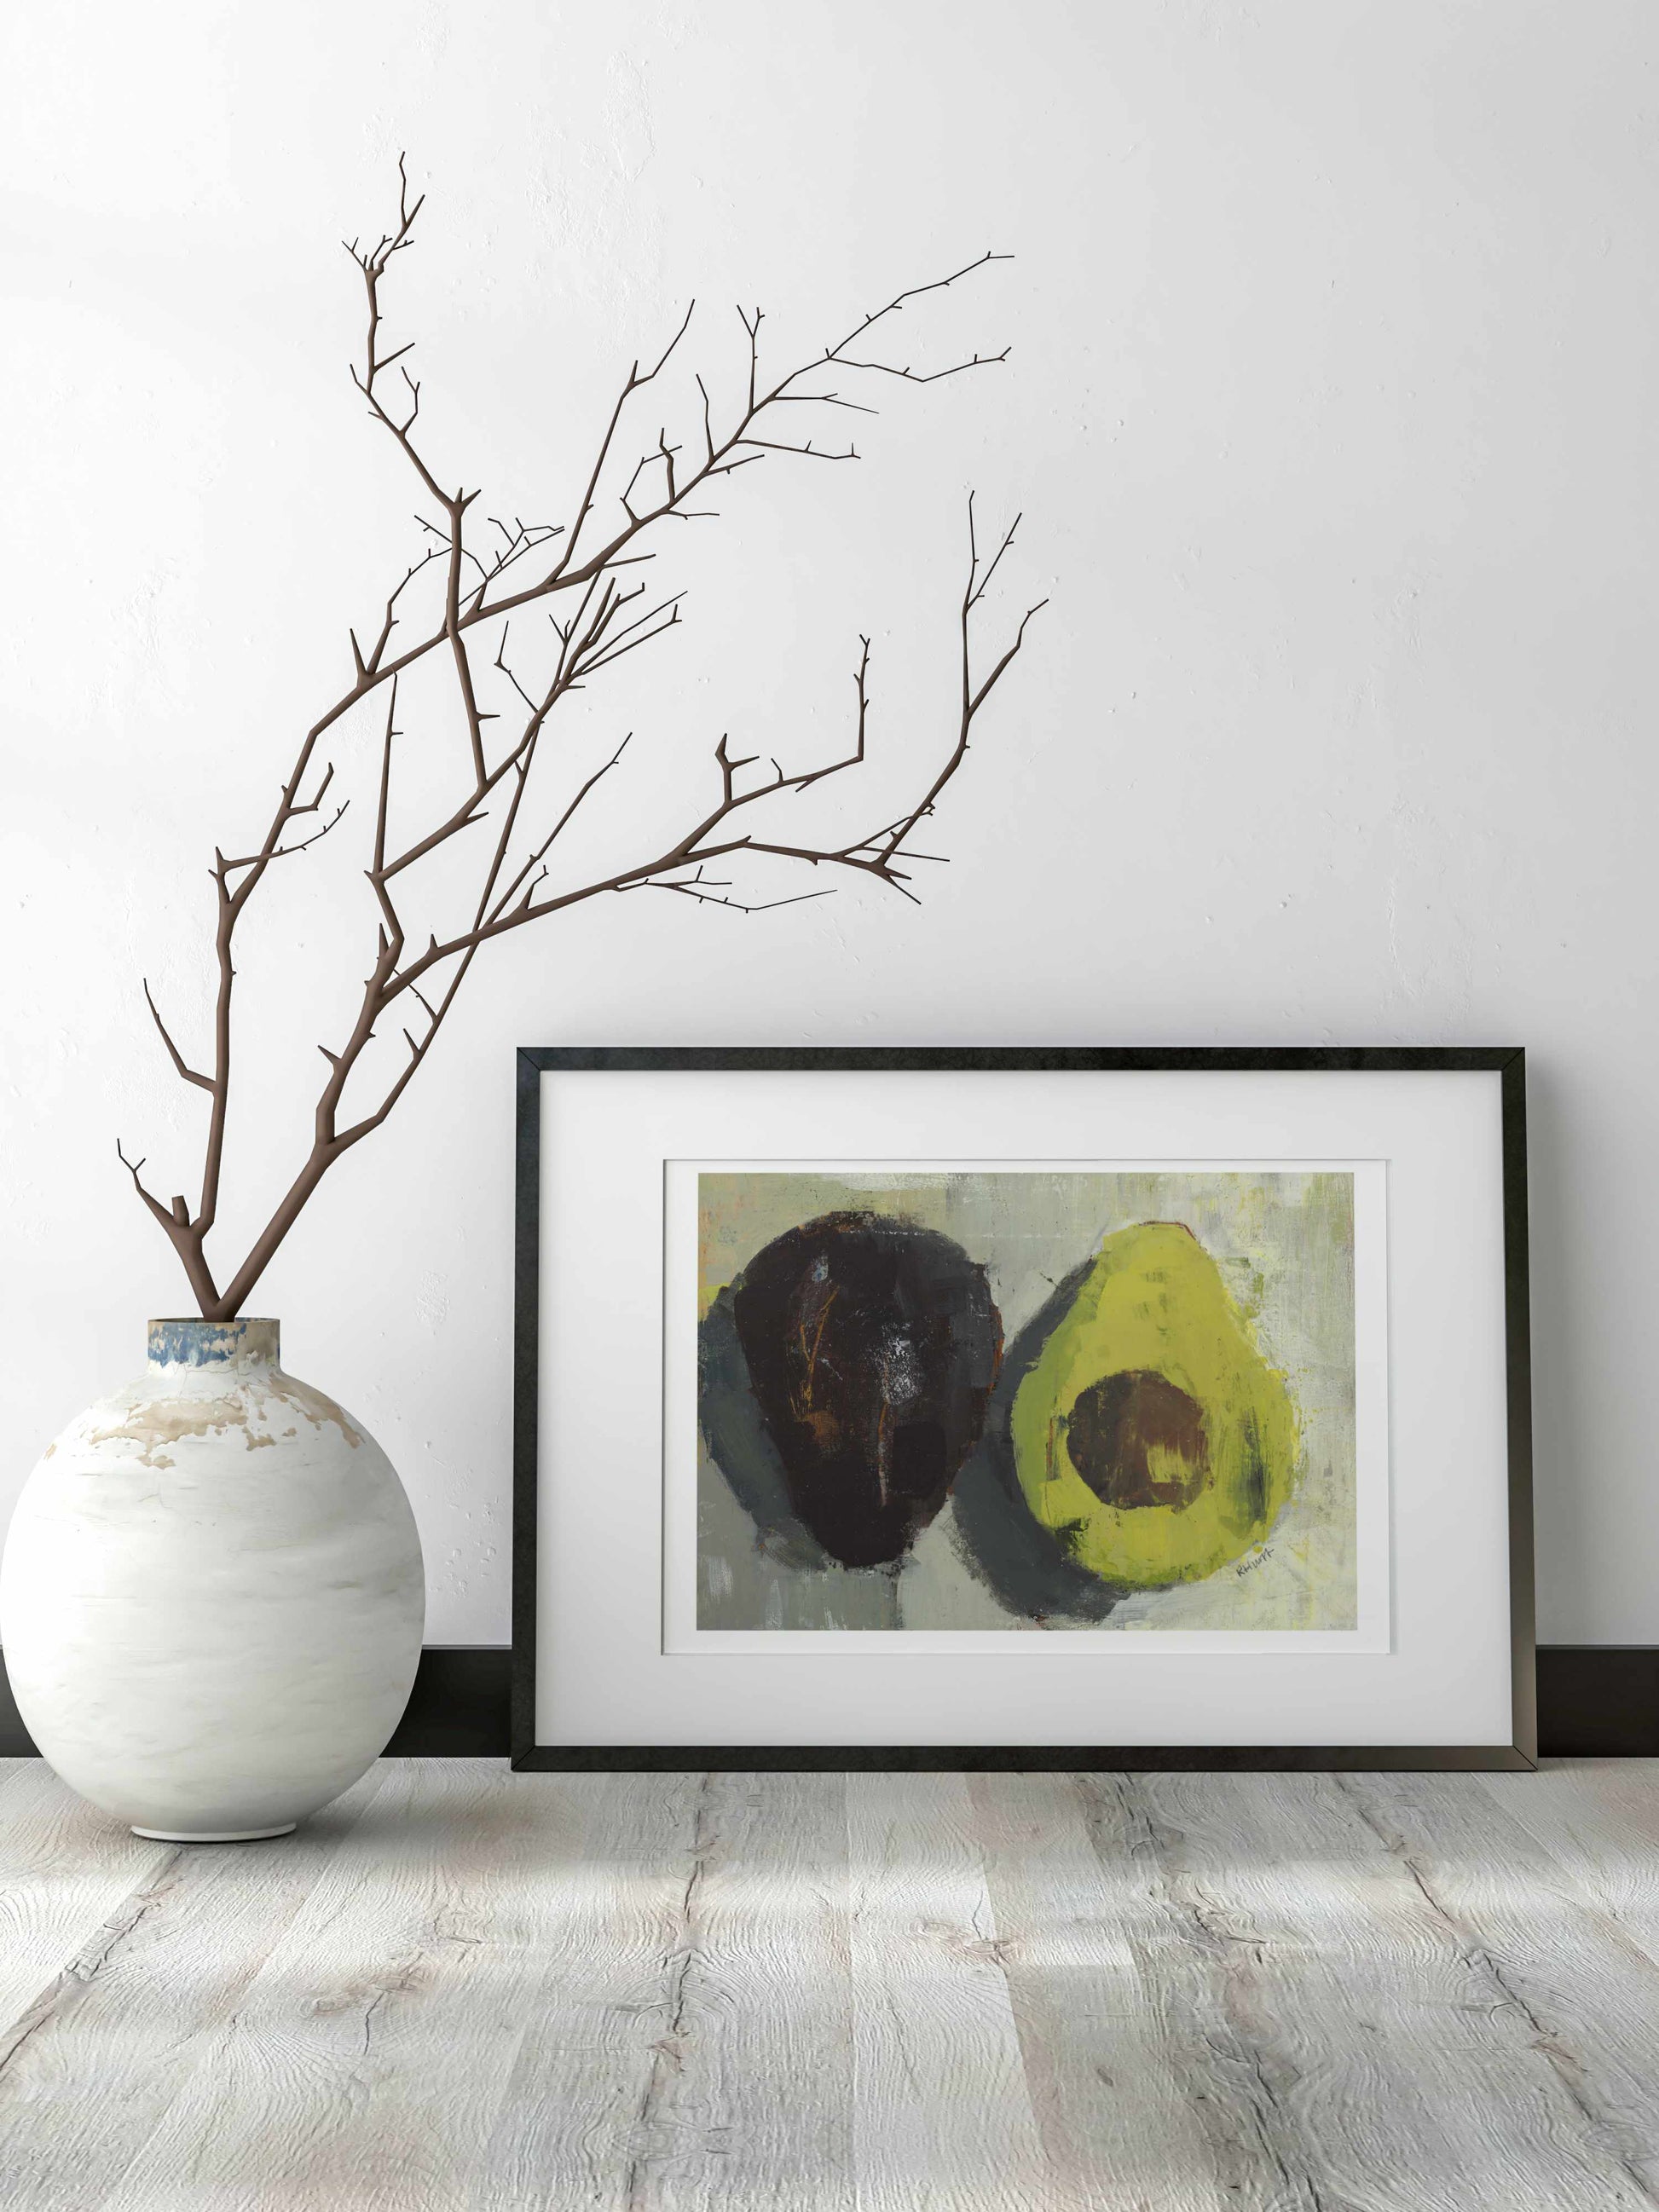 Avocado fine art print shown in black frame with white wall behind